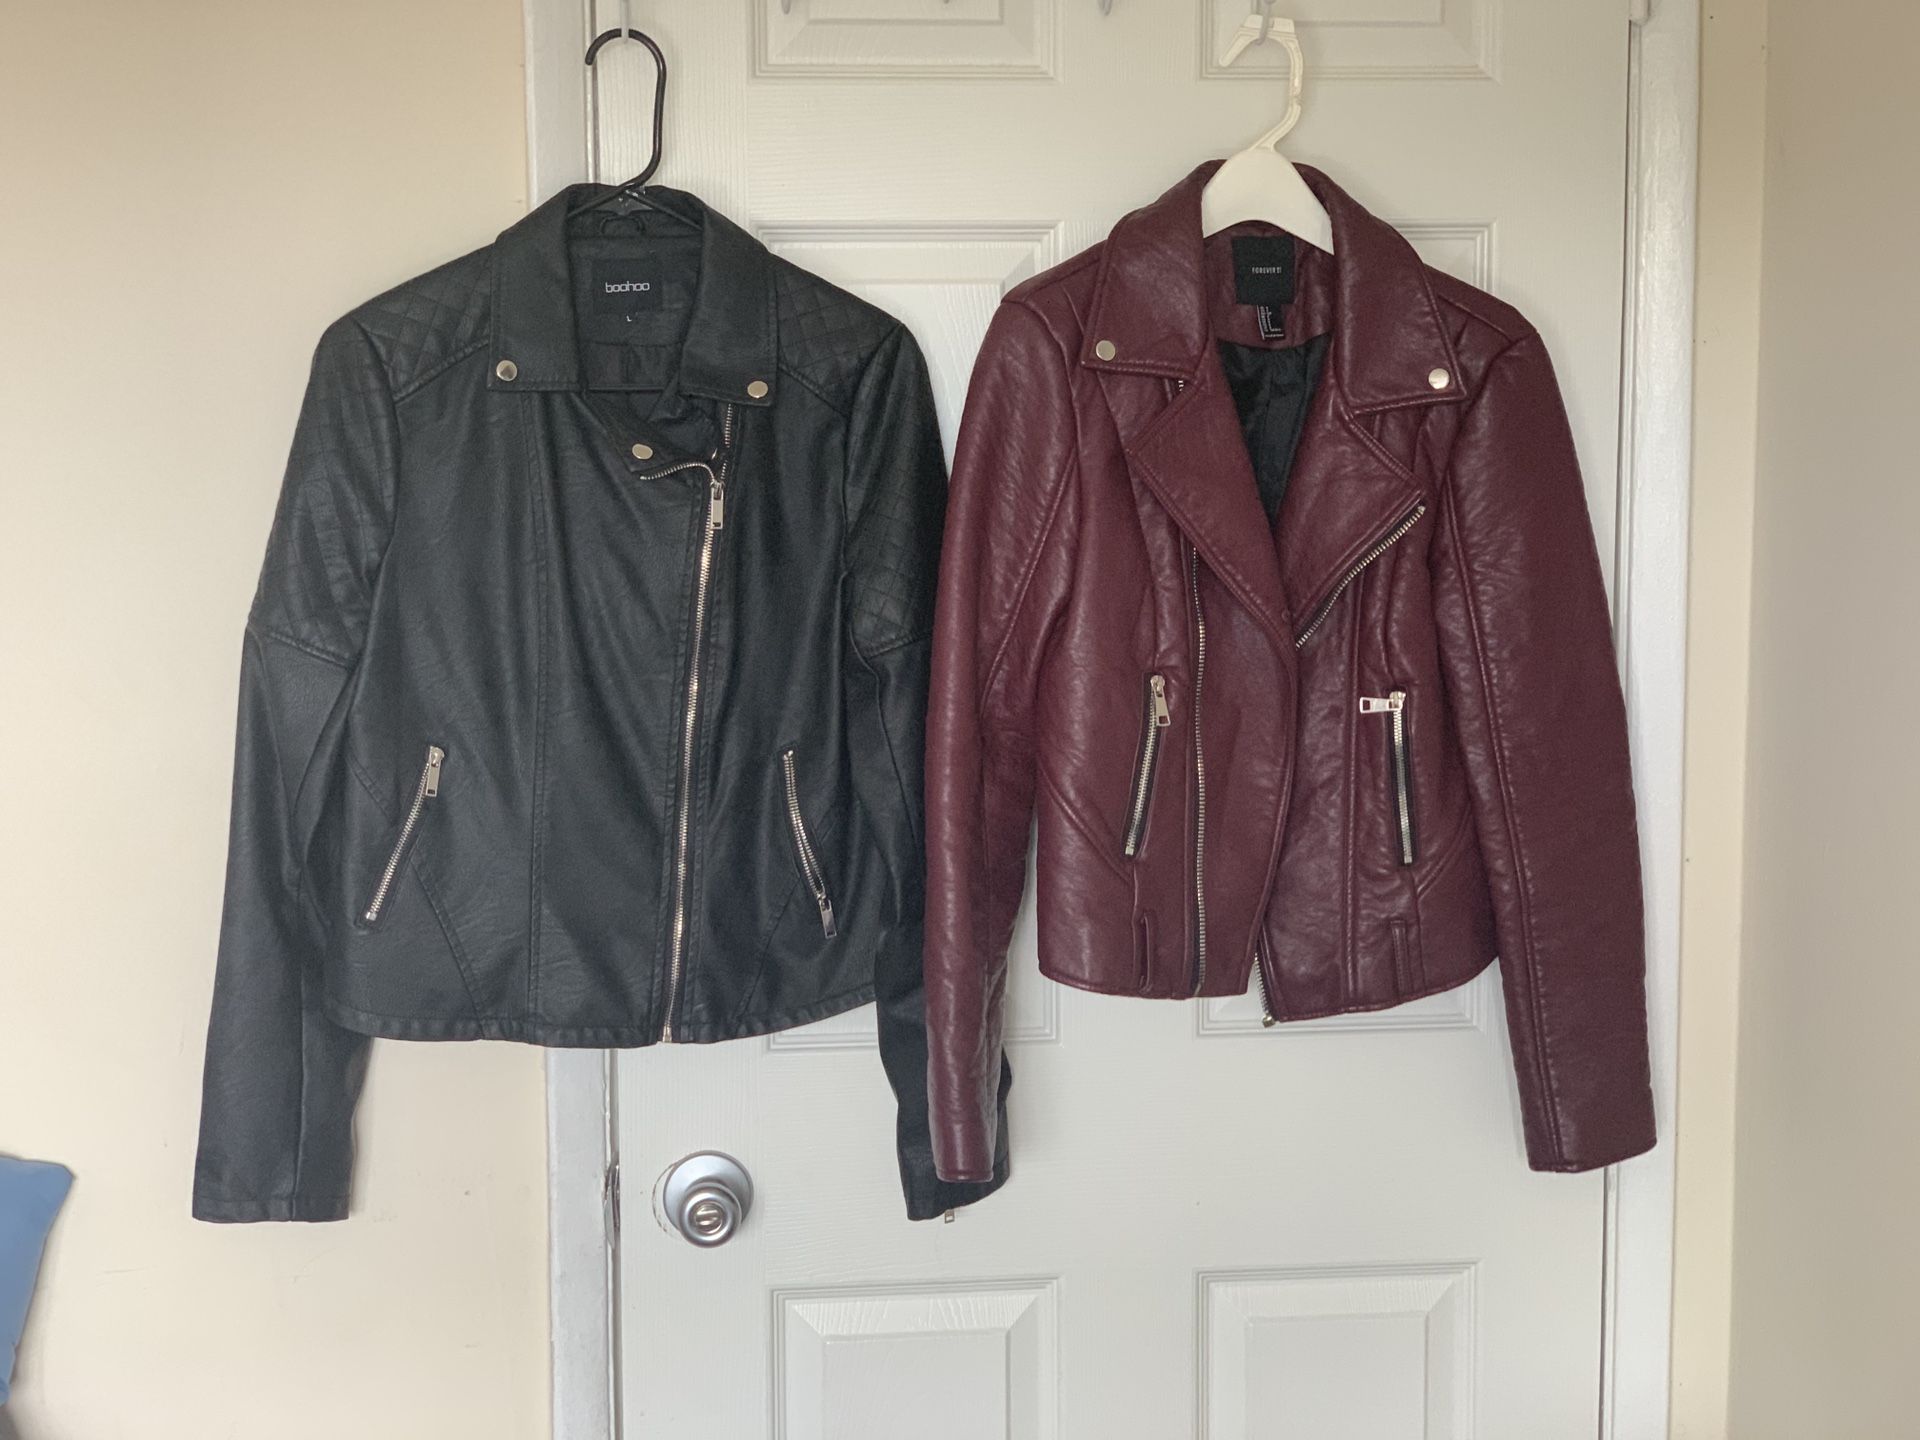 Boohoo / Forever 21 women’s leather jackets